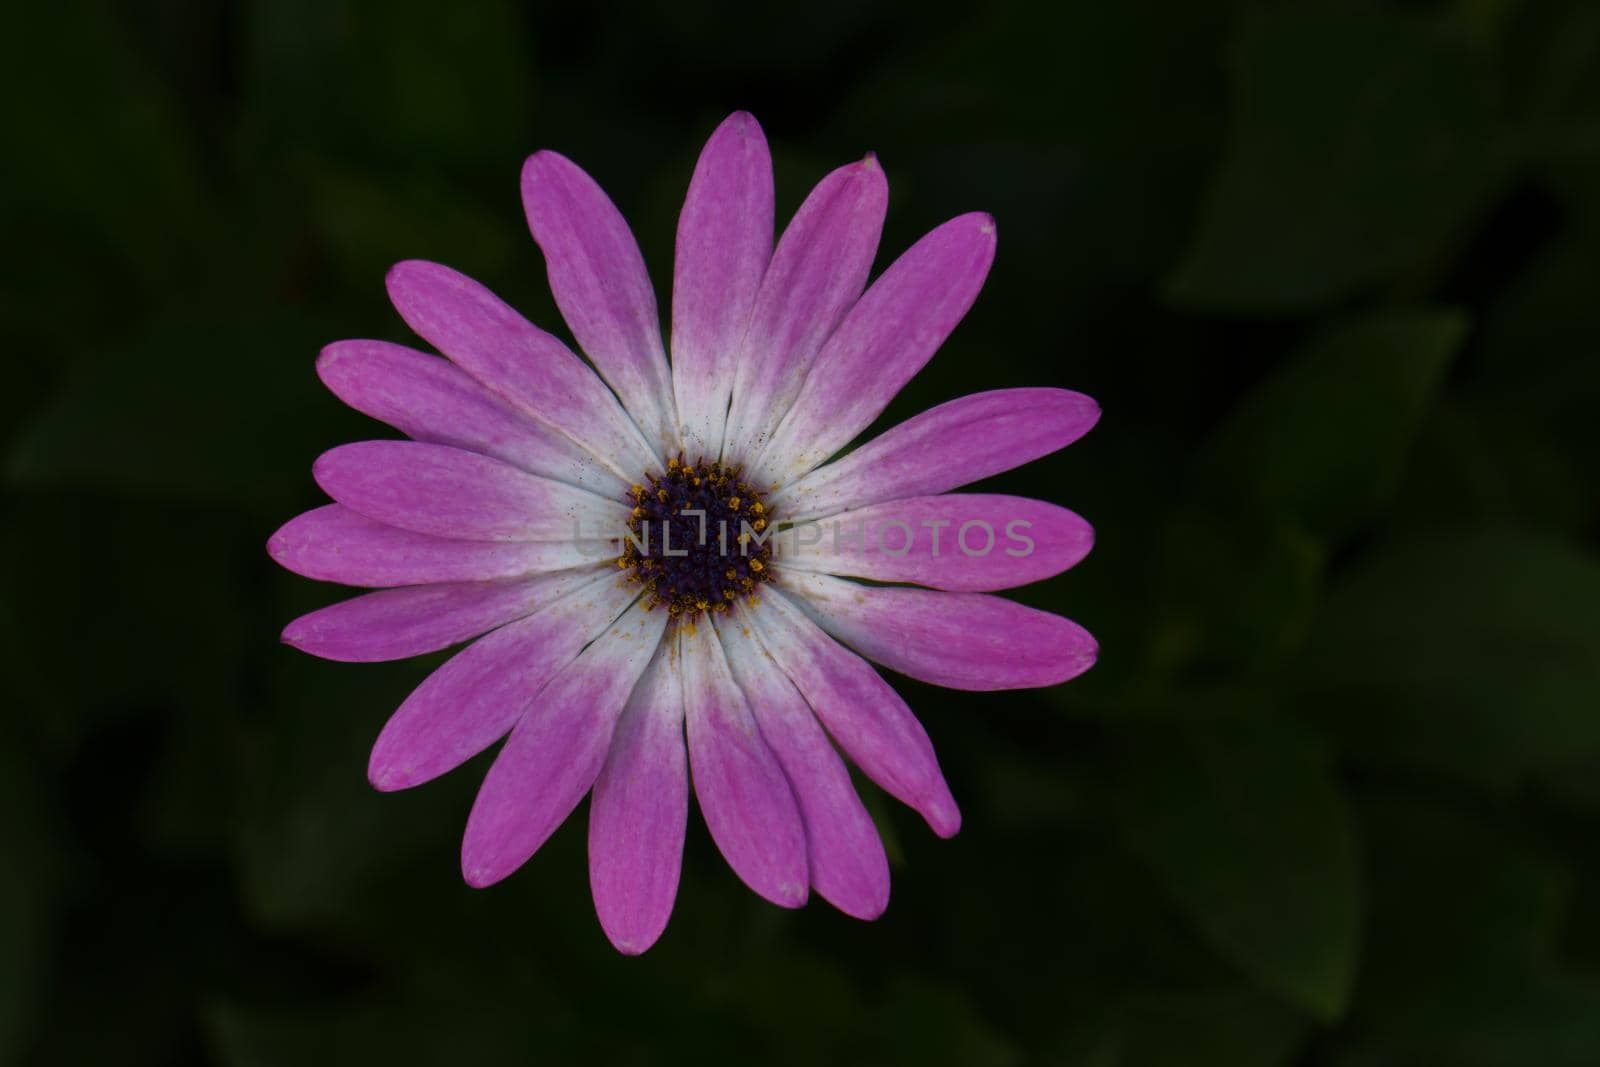 close-up of a flower of Anemone hortensis on a dark background out of focus